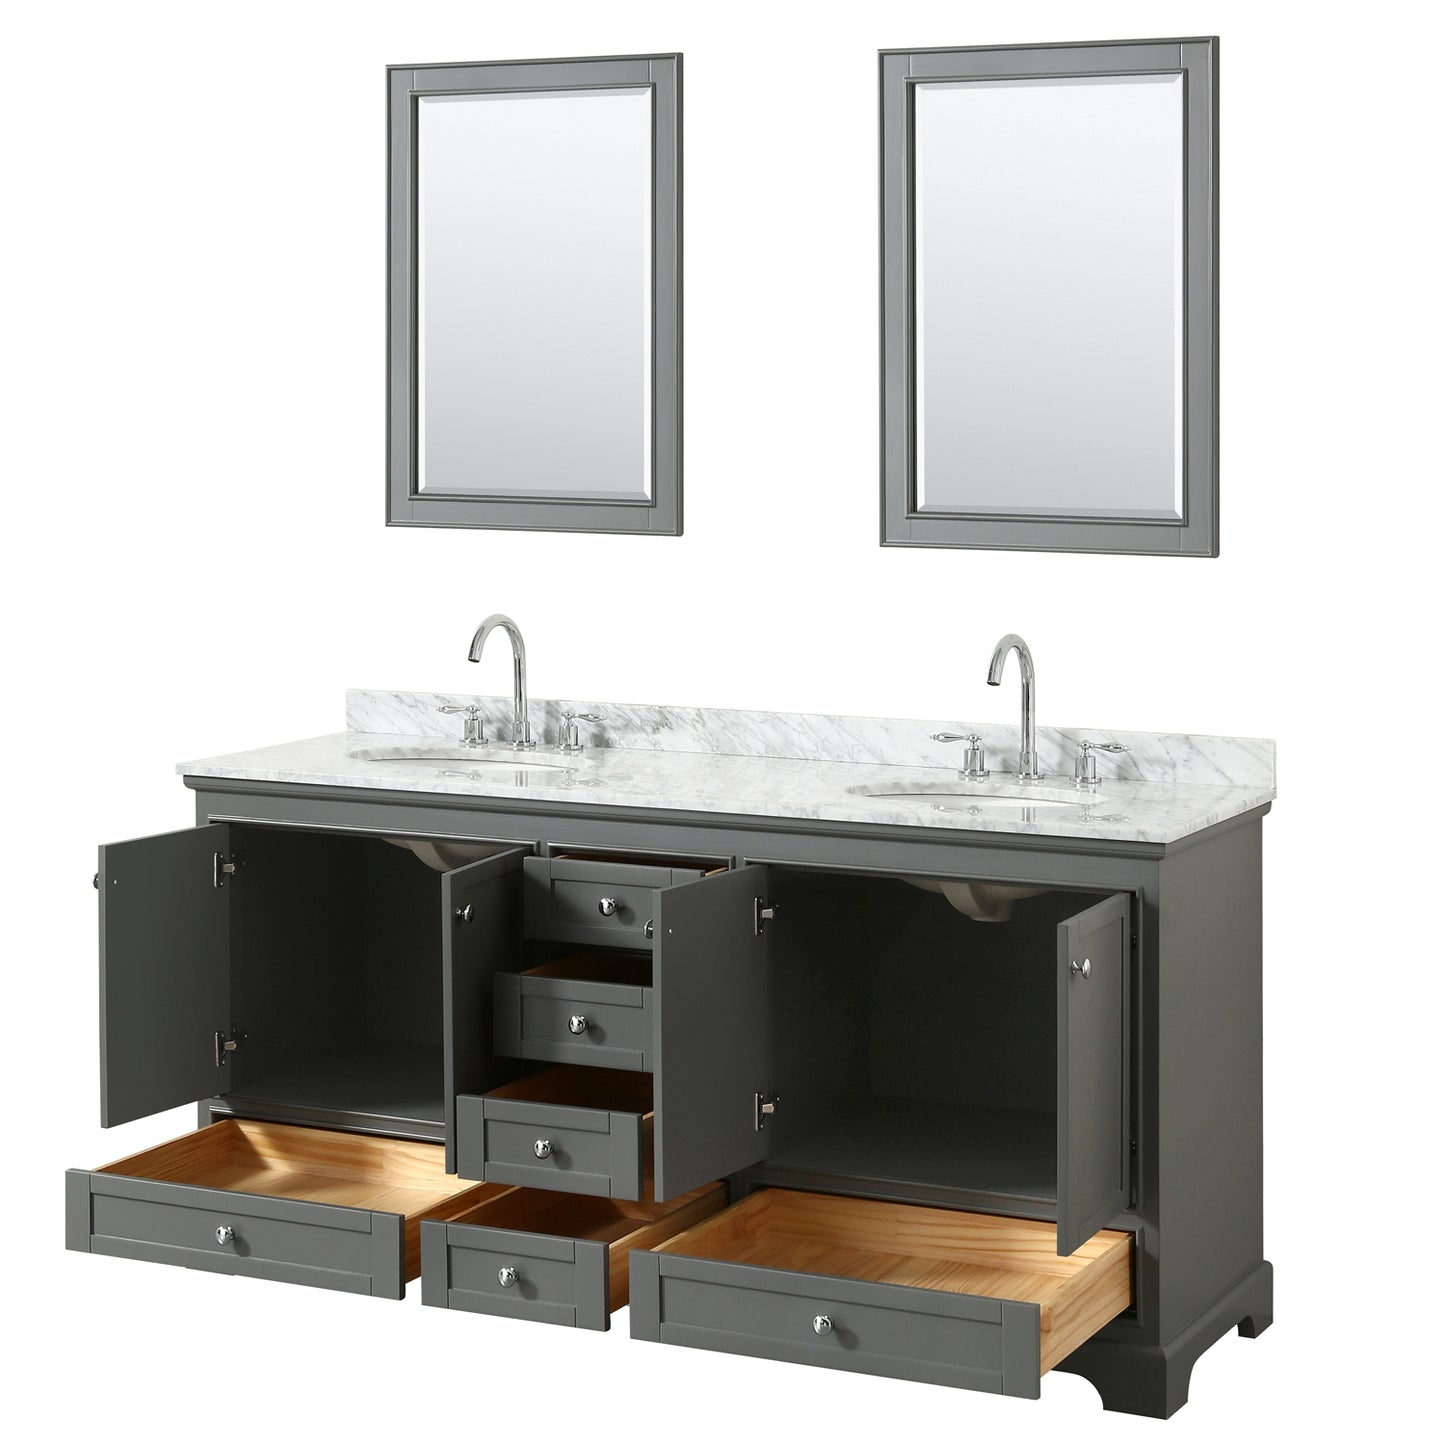 72 Inch Double Bathroom Vanity, White Carrara Marble Countertop, Undermount Oval Sinks, and 24 Inch Mirrors - Luxe Bathroom Vanities Luxury Bathroom Fixtures Bathroom Furniture